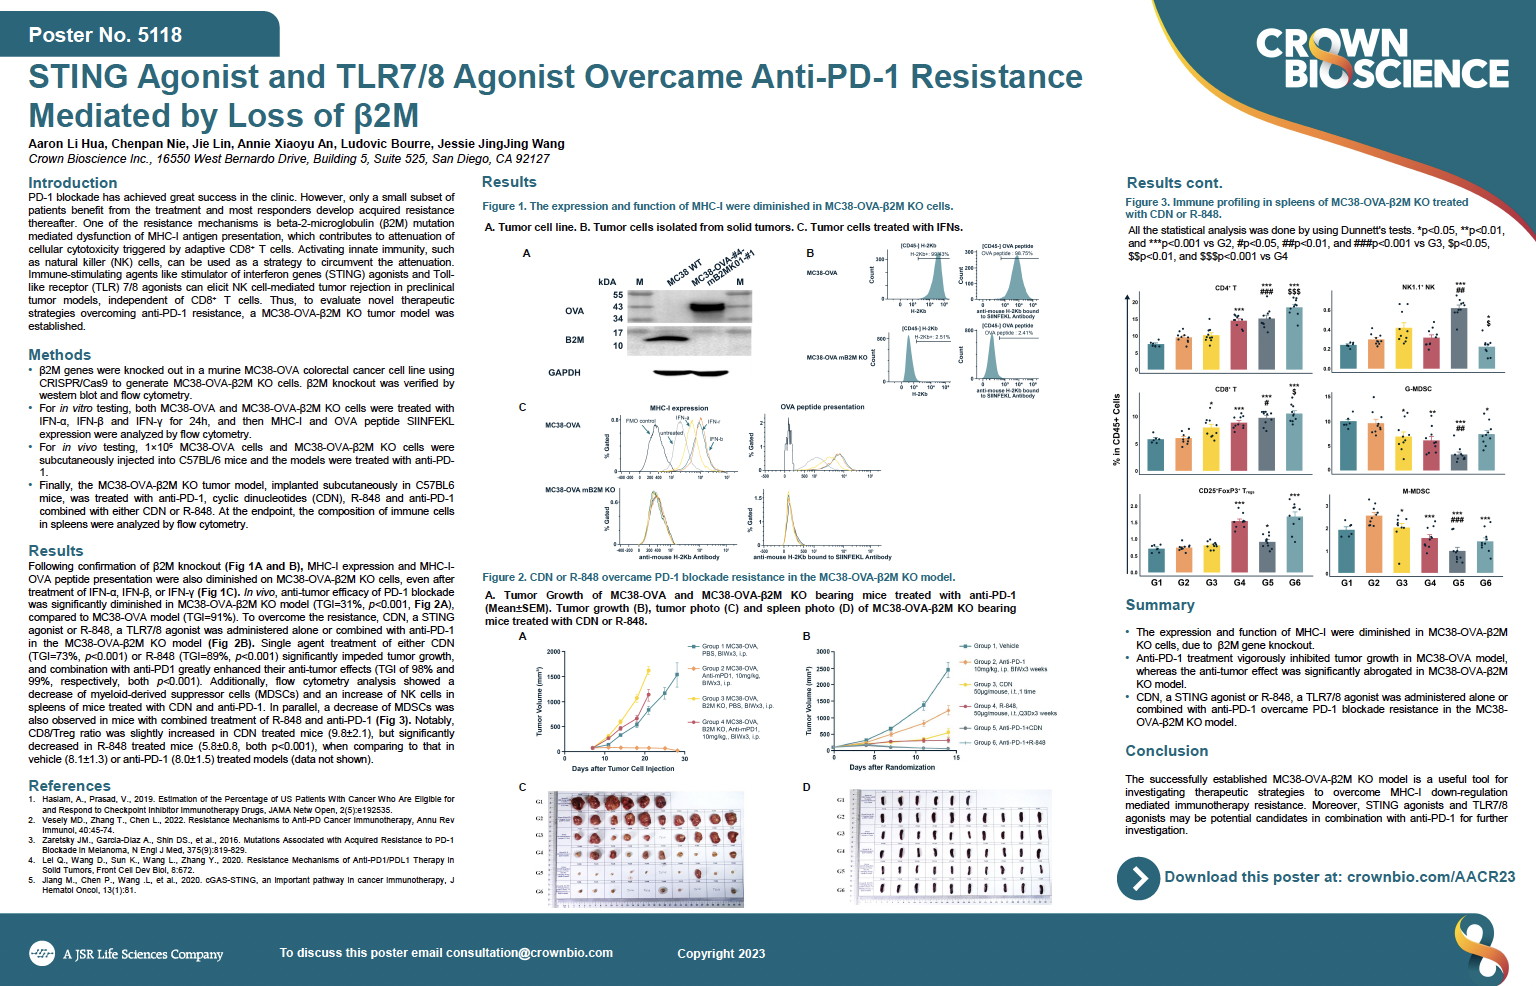 AACR 2023 Posters 5118: STING Agonist and TLR7/8 Agonist Overcome Anti-PD-1 Resistance Mediated by Loss of β2M